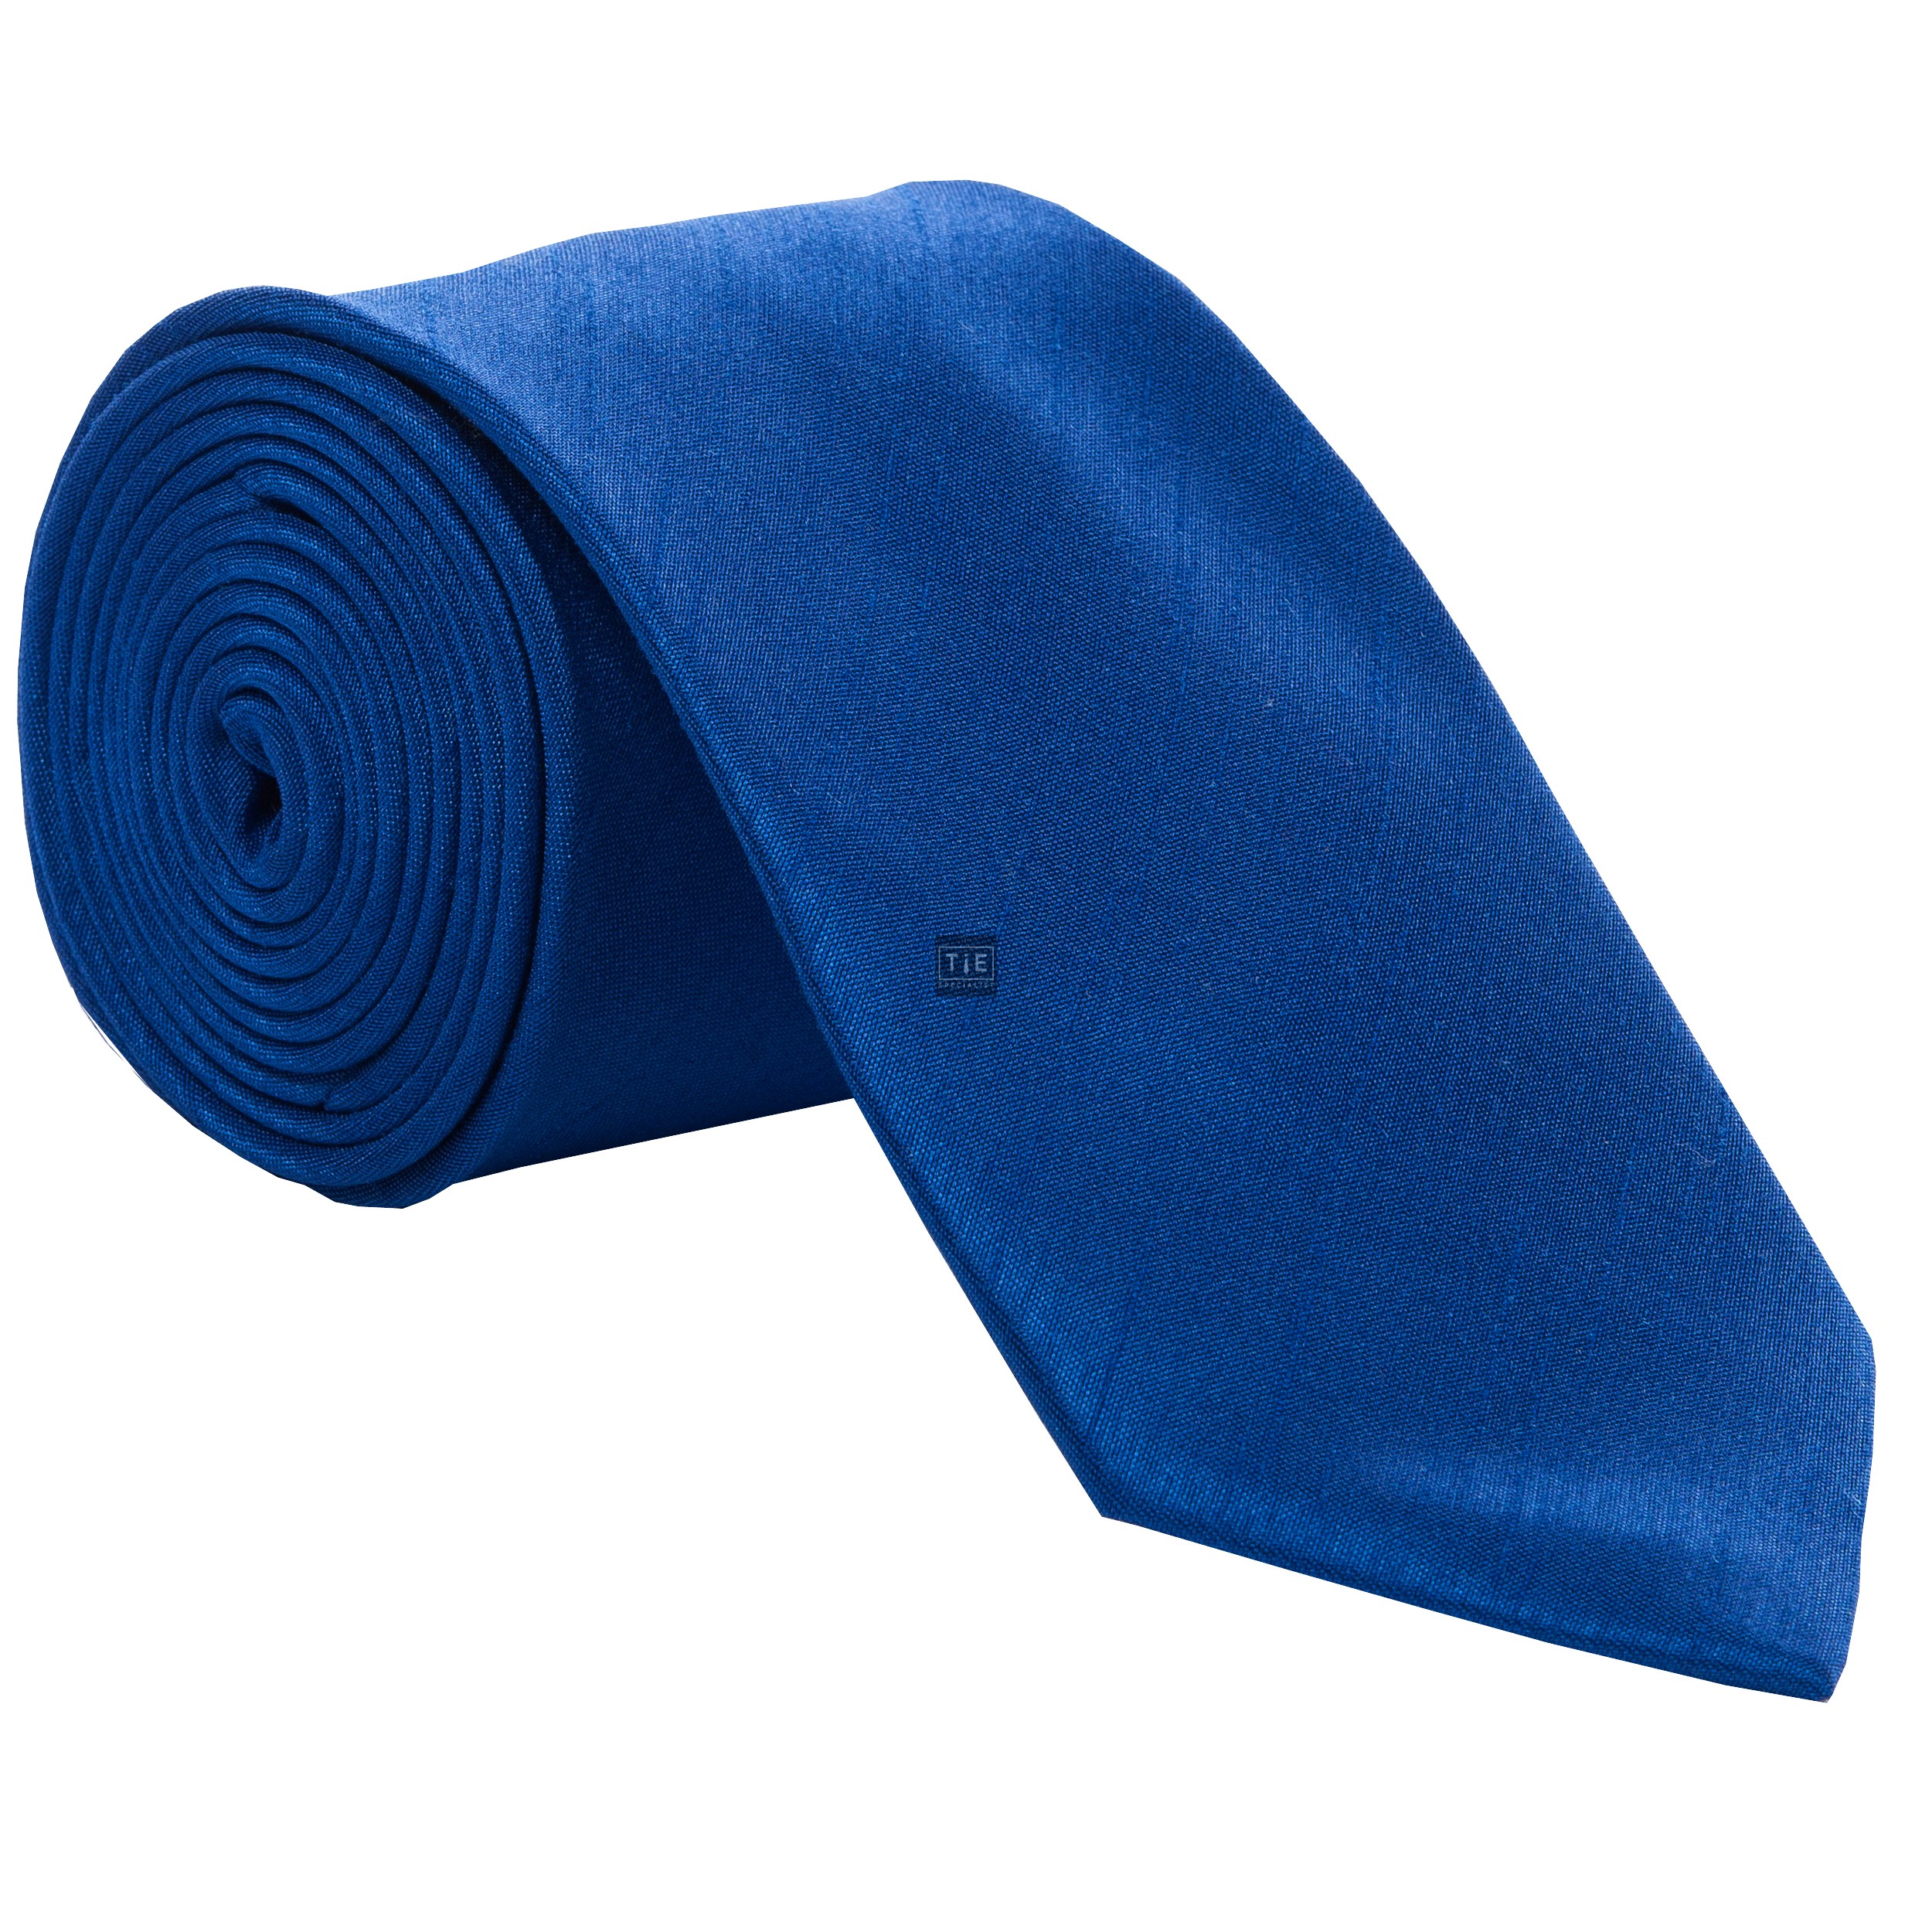 Royal Blue Shantung Tie with Matching Pocket Hankie